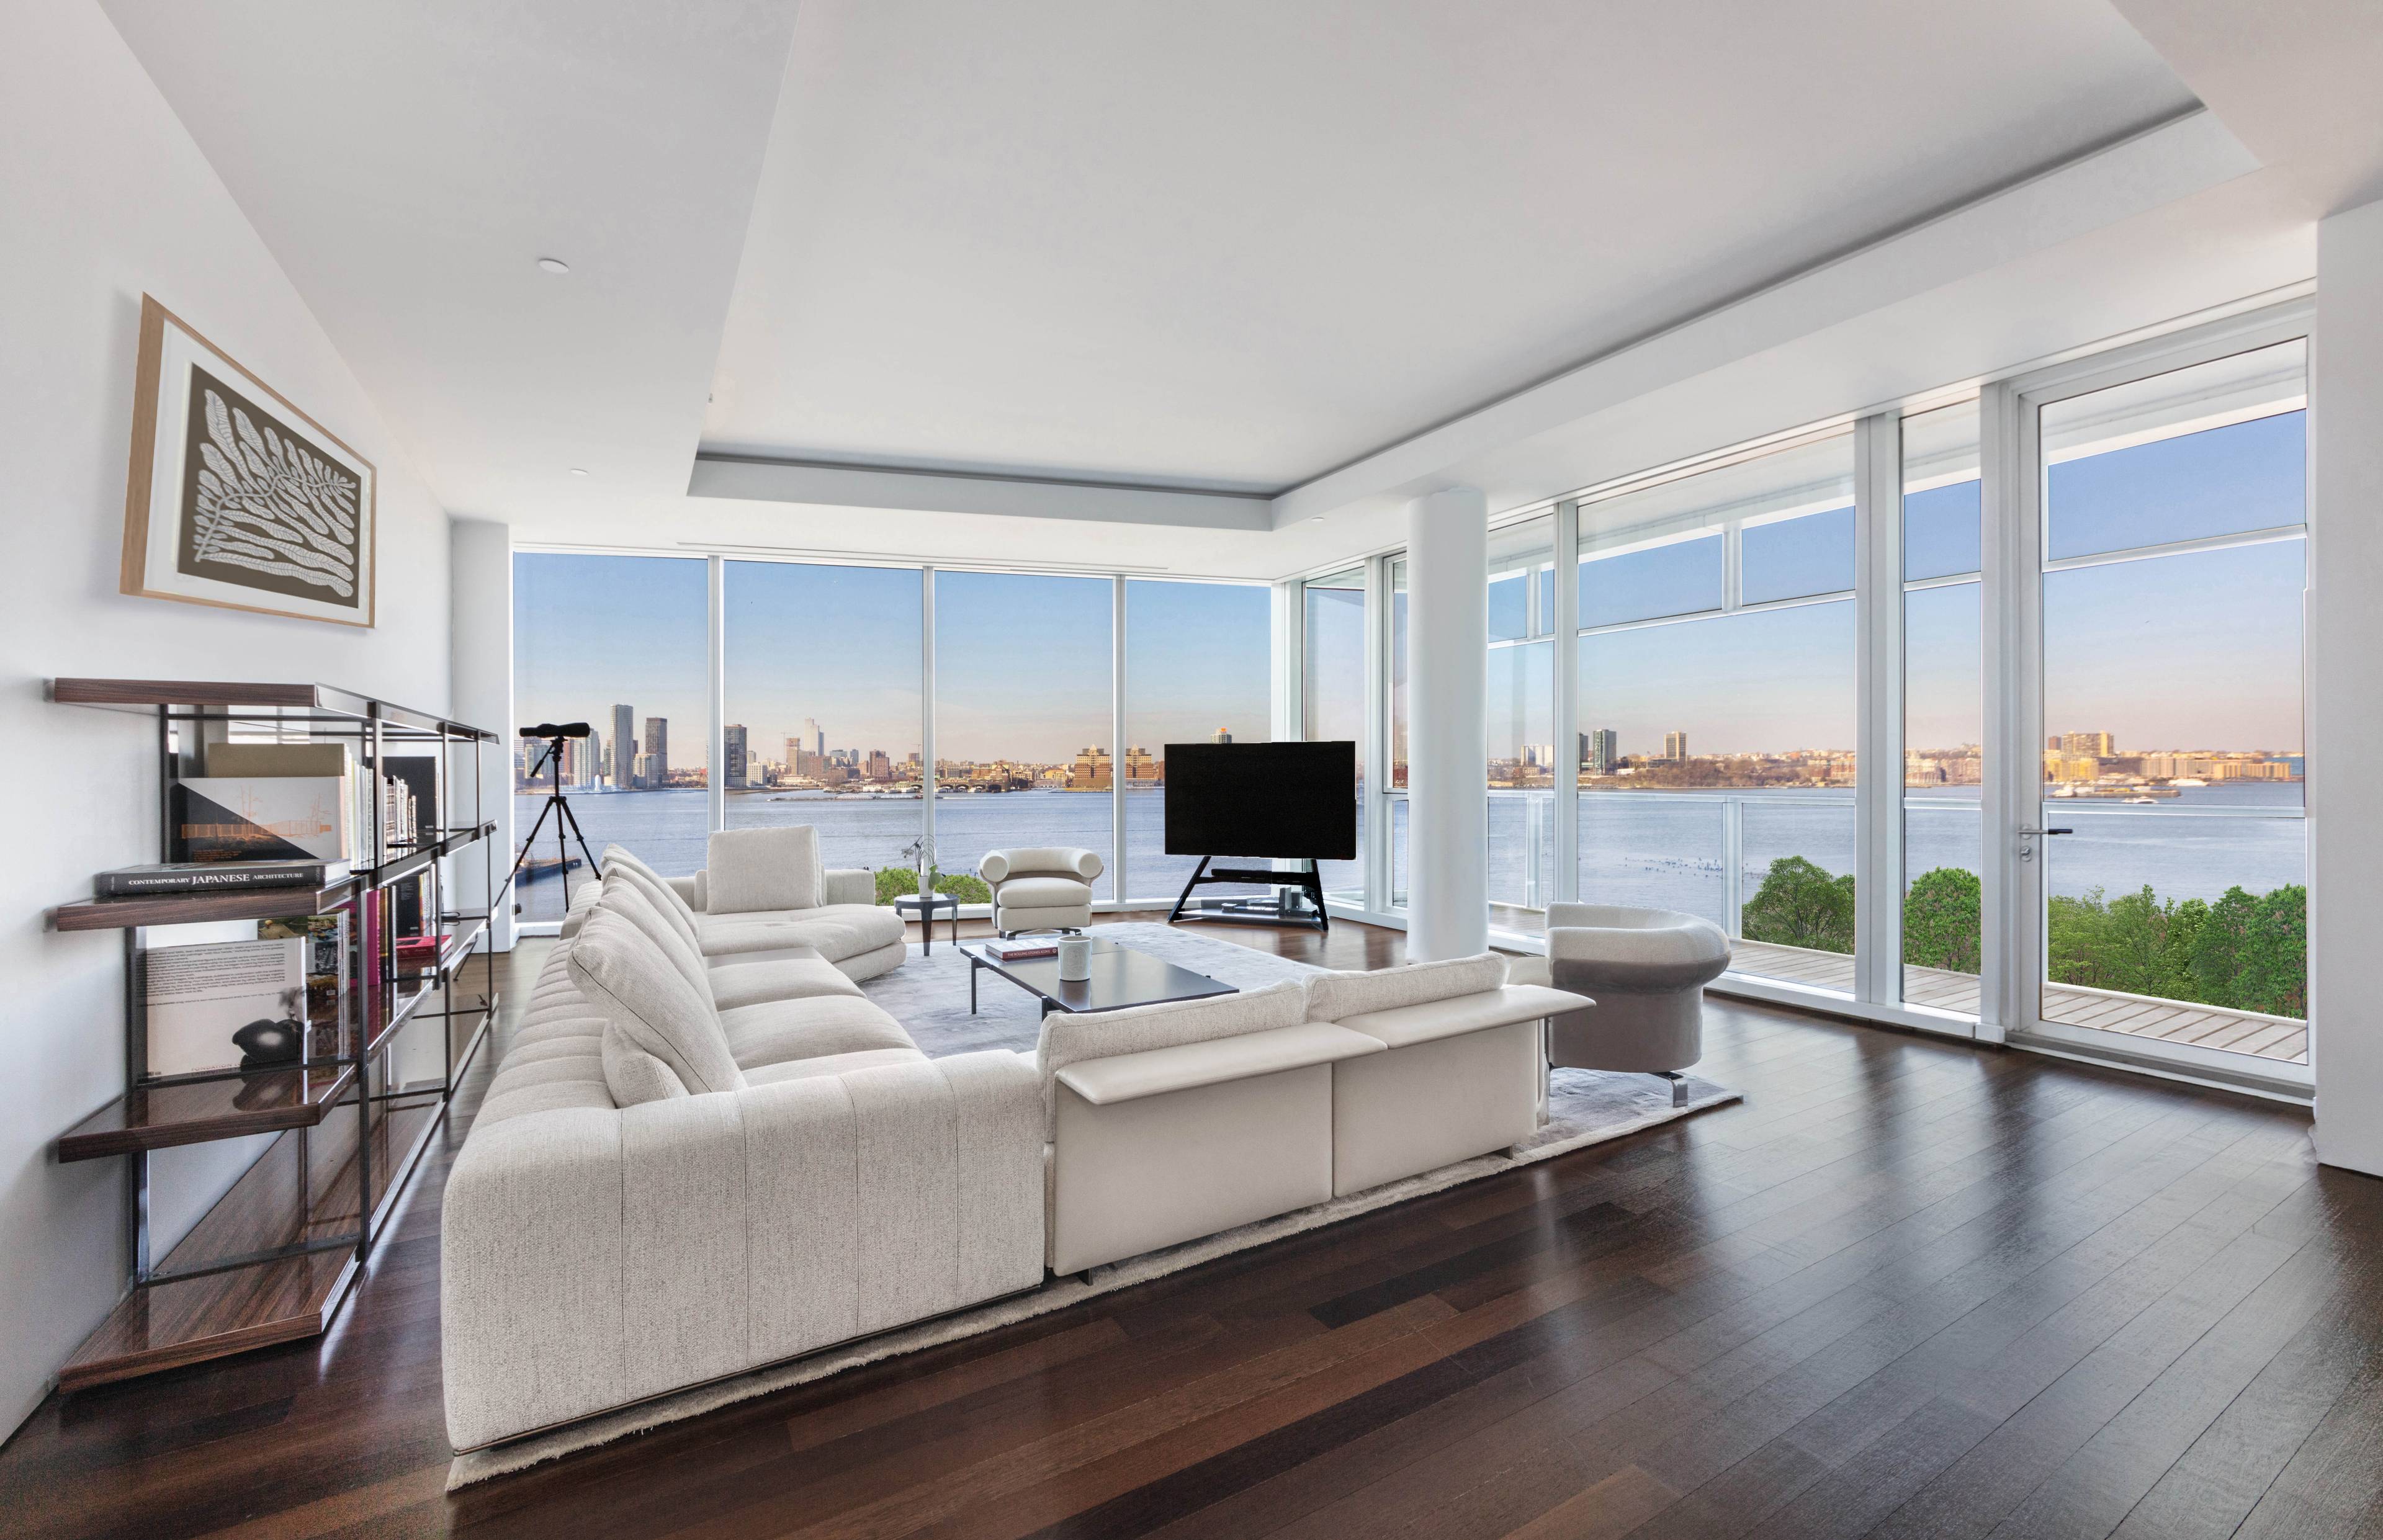 Step into 165 Charles Street, Residence 18, a flawlessly crafted and contemporary masterpiece located within the renowned Richard Meier condominium.